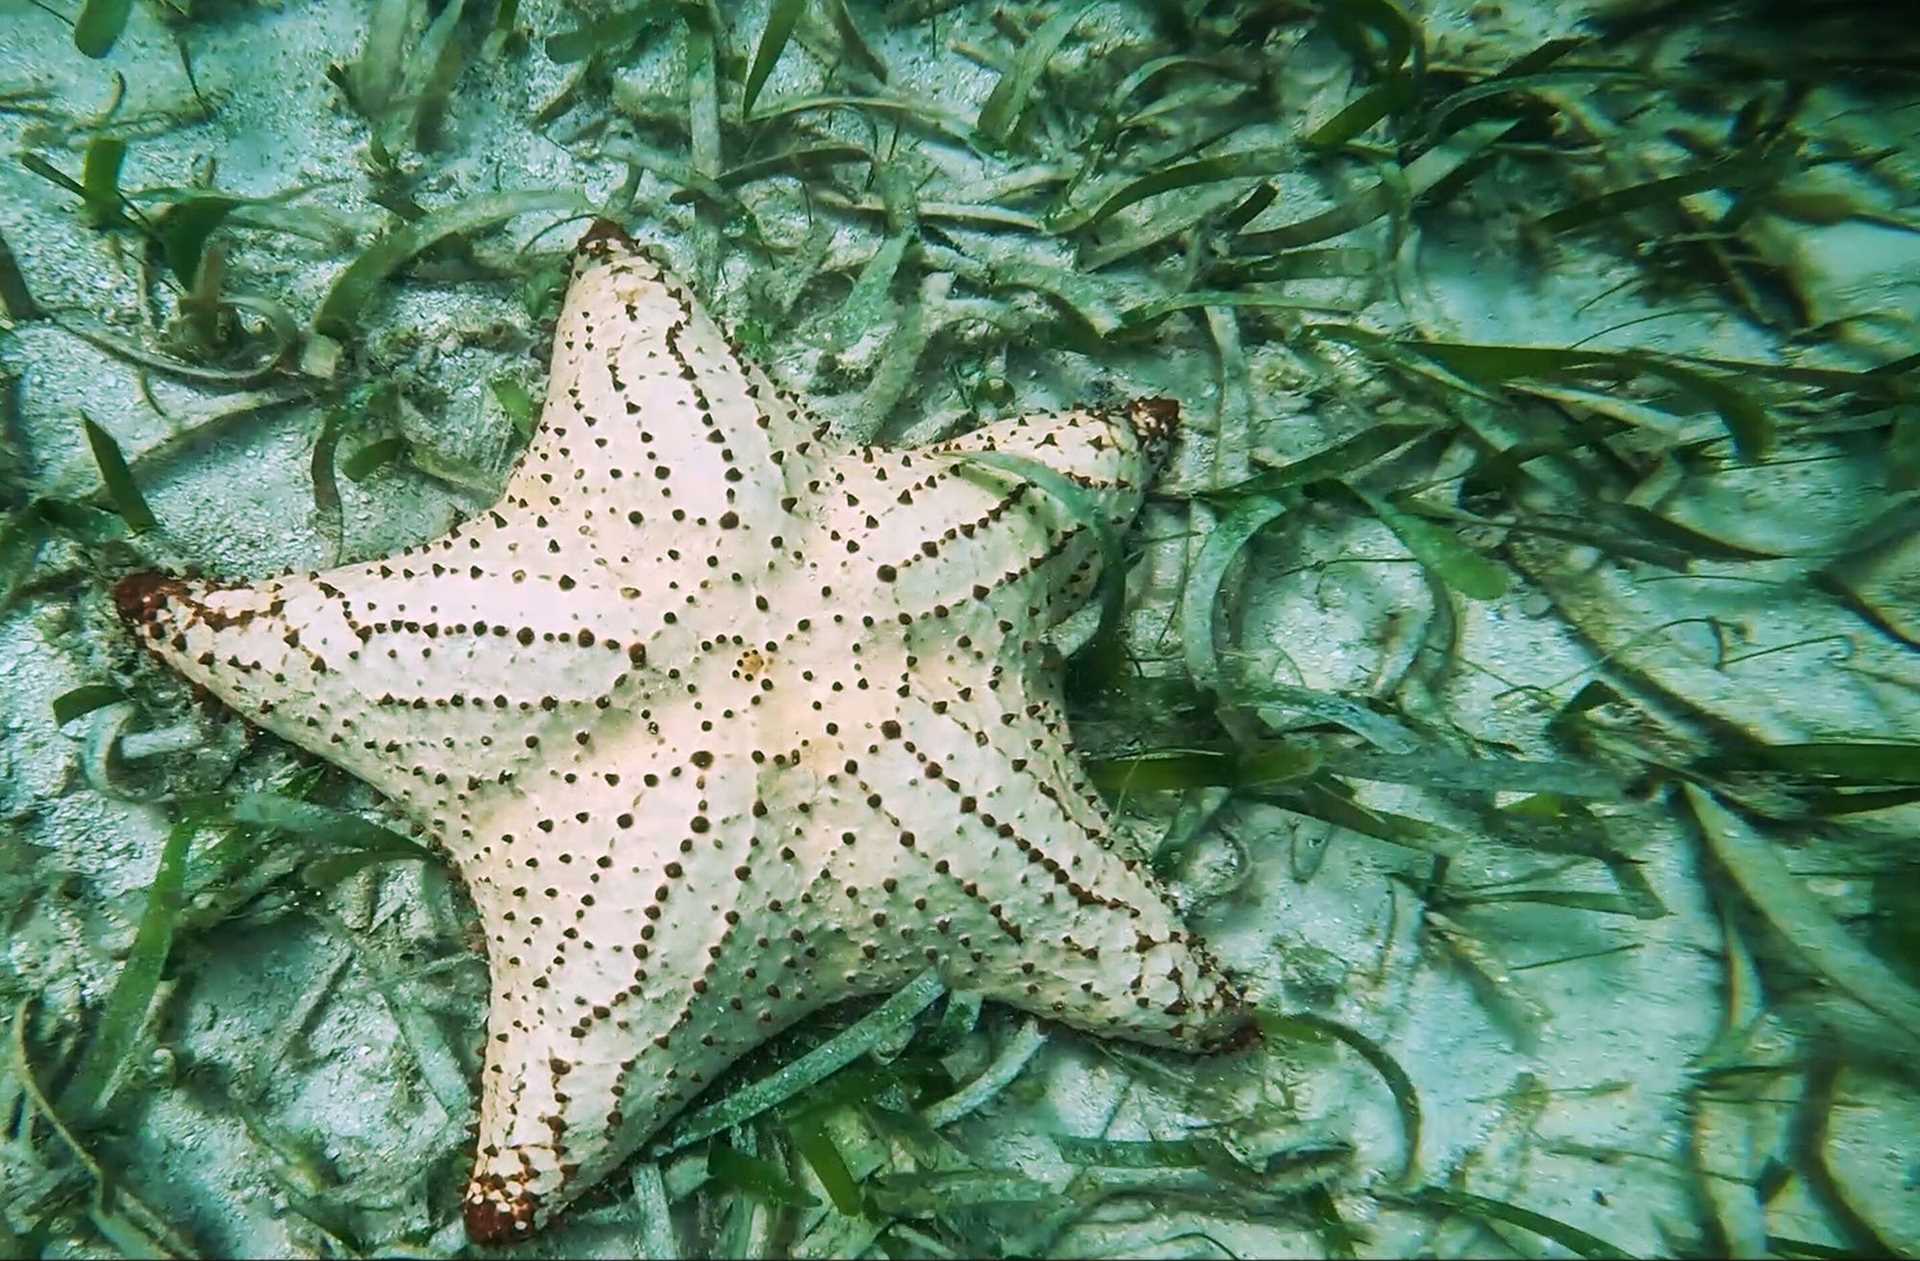 white sea star with black markings